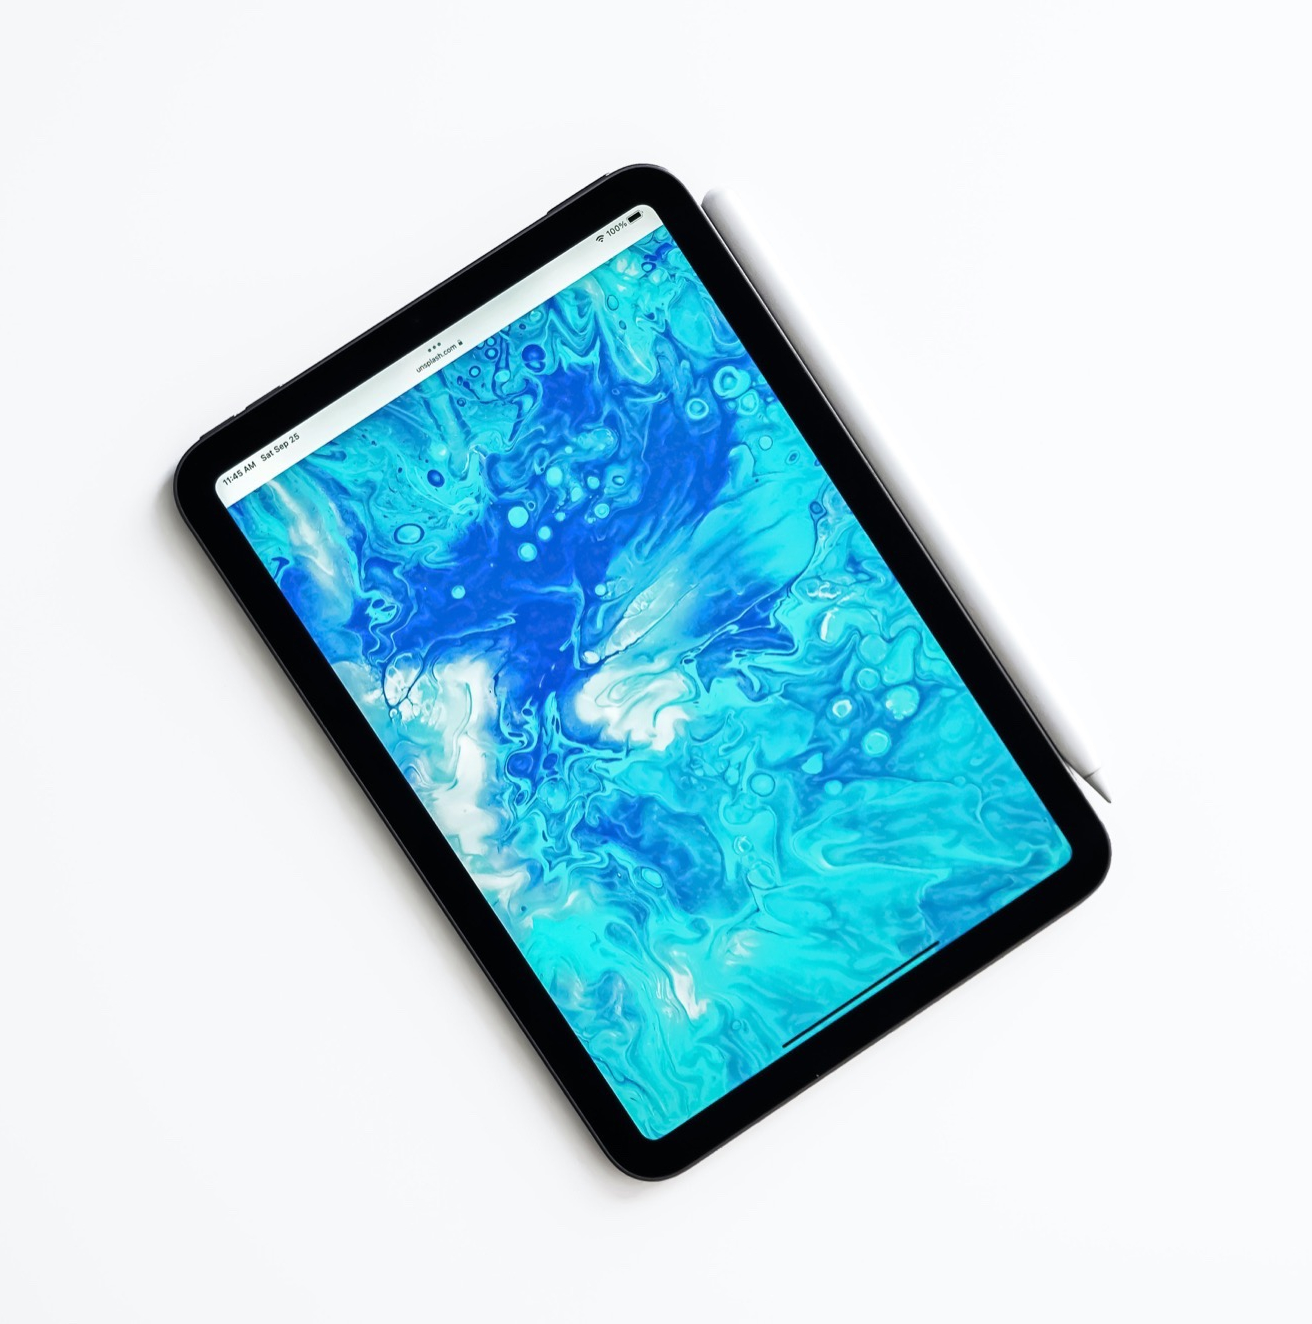 Apple Reportedly Plans To Release An Ipad Mini 6 Pro With A 120 Hz  Promotion Display - Notebookcheck.Net News